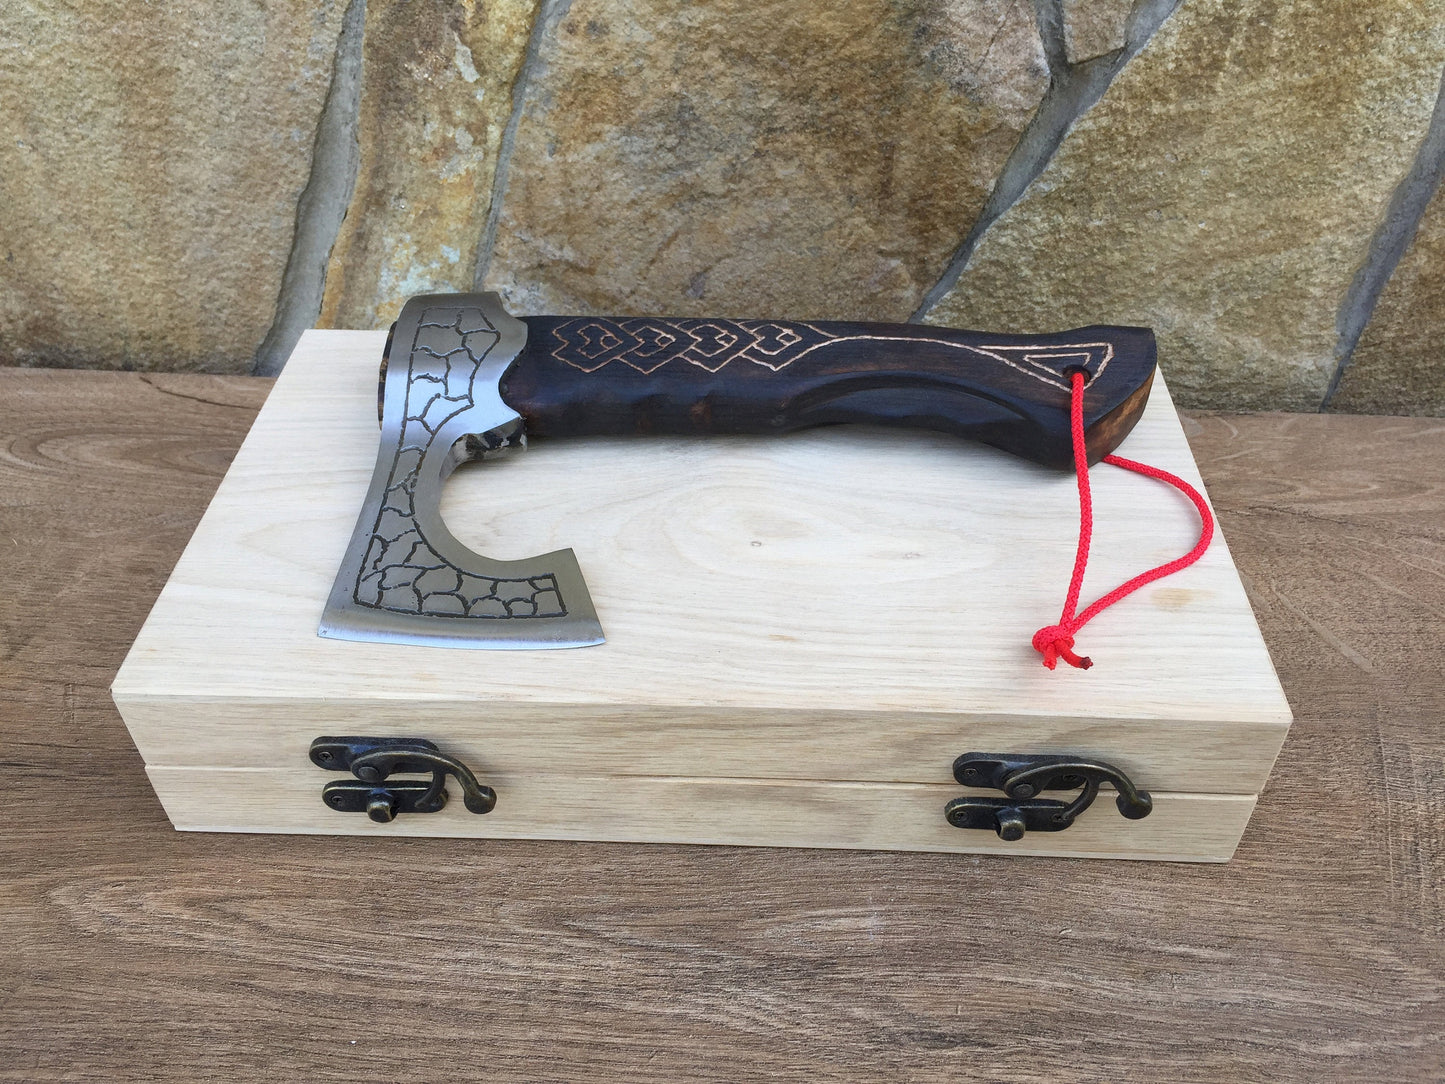 Viking axe in a wooden box, personalized gift, mens gifts, medieval axe, tomahawk, throwing axe, hatchet, personalized axe, engraved axe, ax